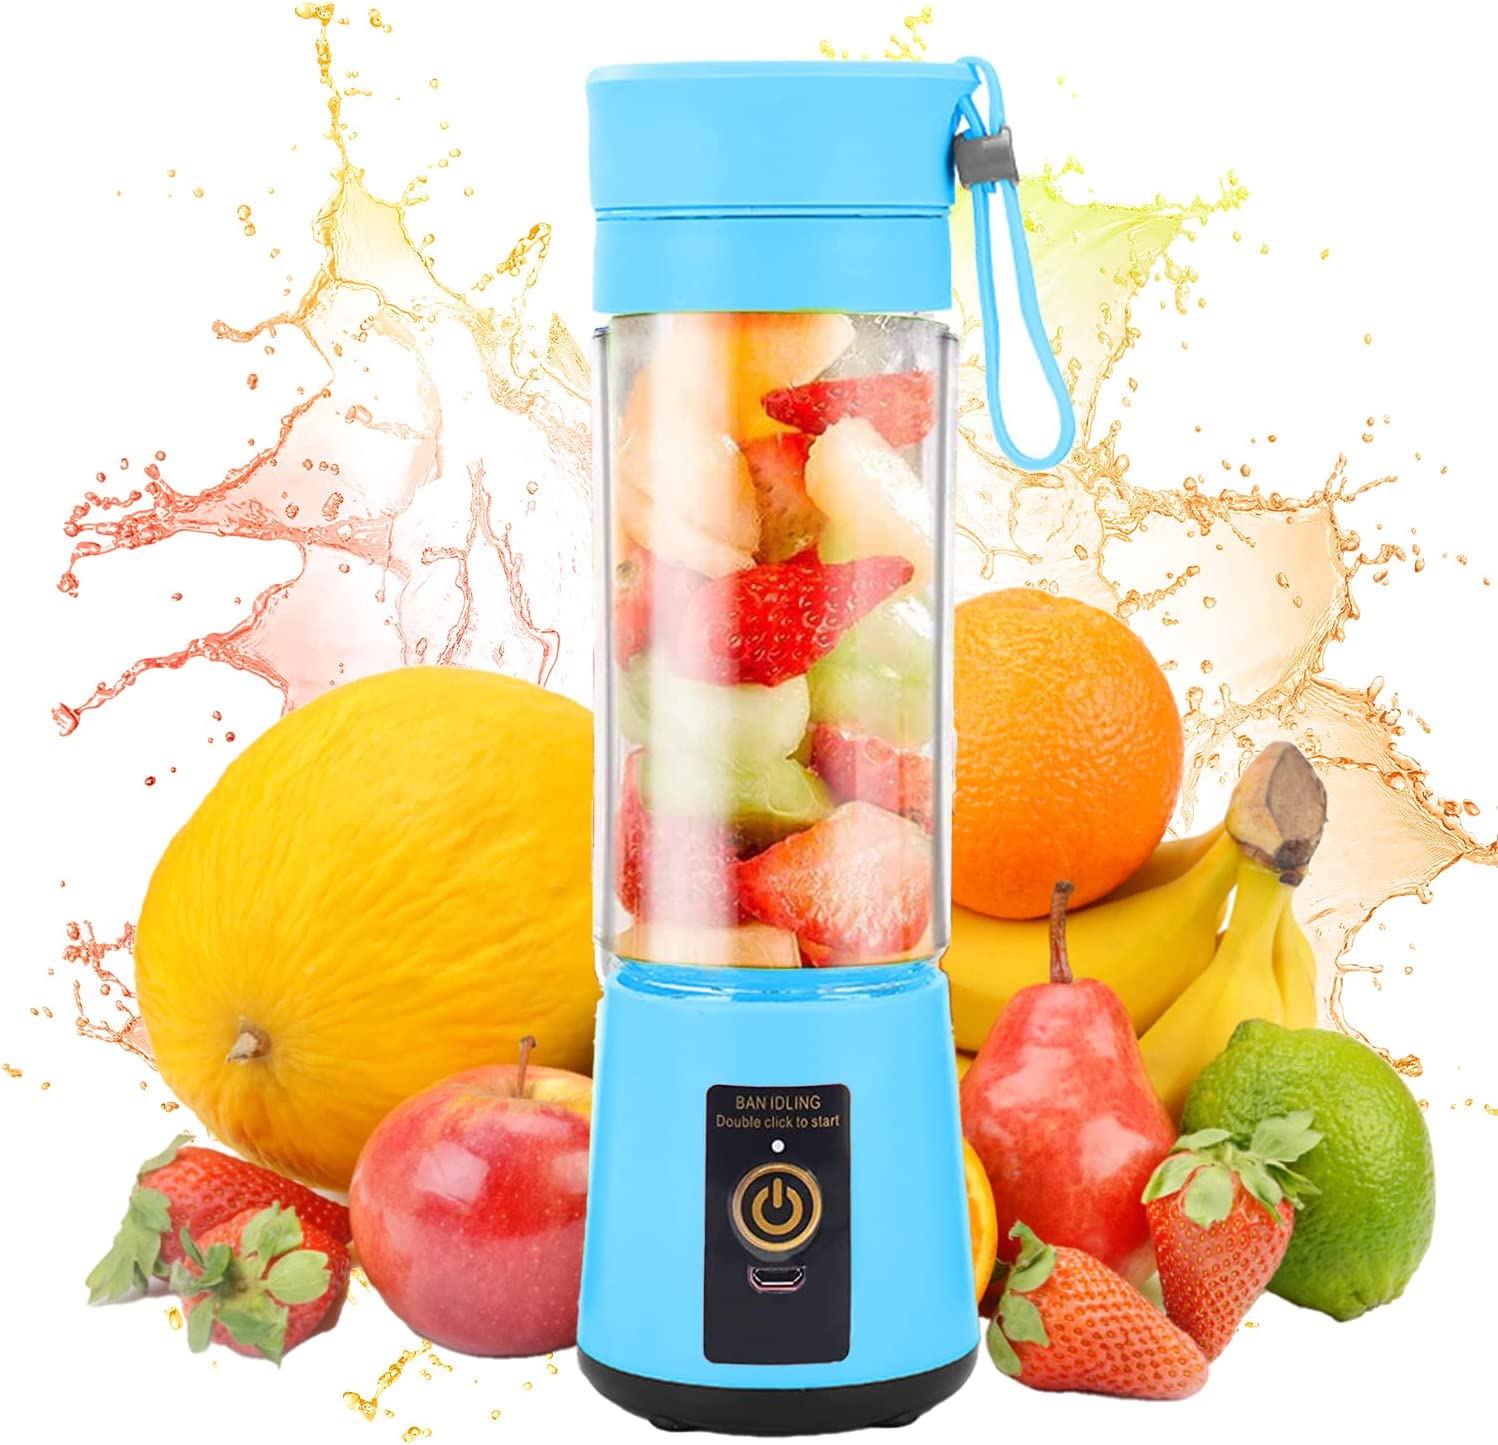 Portable Blender - Rechargeable 6-Sheet Blender Cup | Travel Blender for Fresh Juice Shakes and Smoothies | For Home, Sports, Outdoor, Travel (Blue)